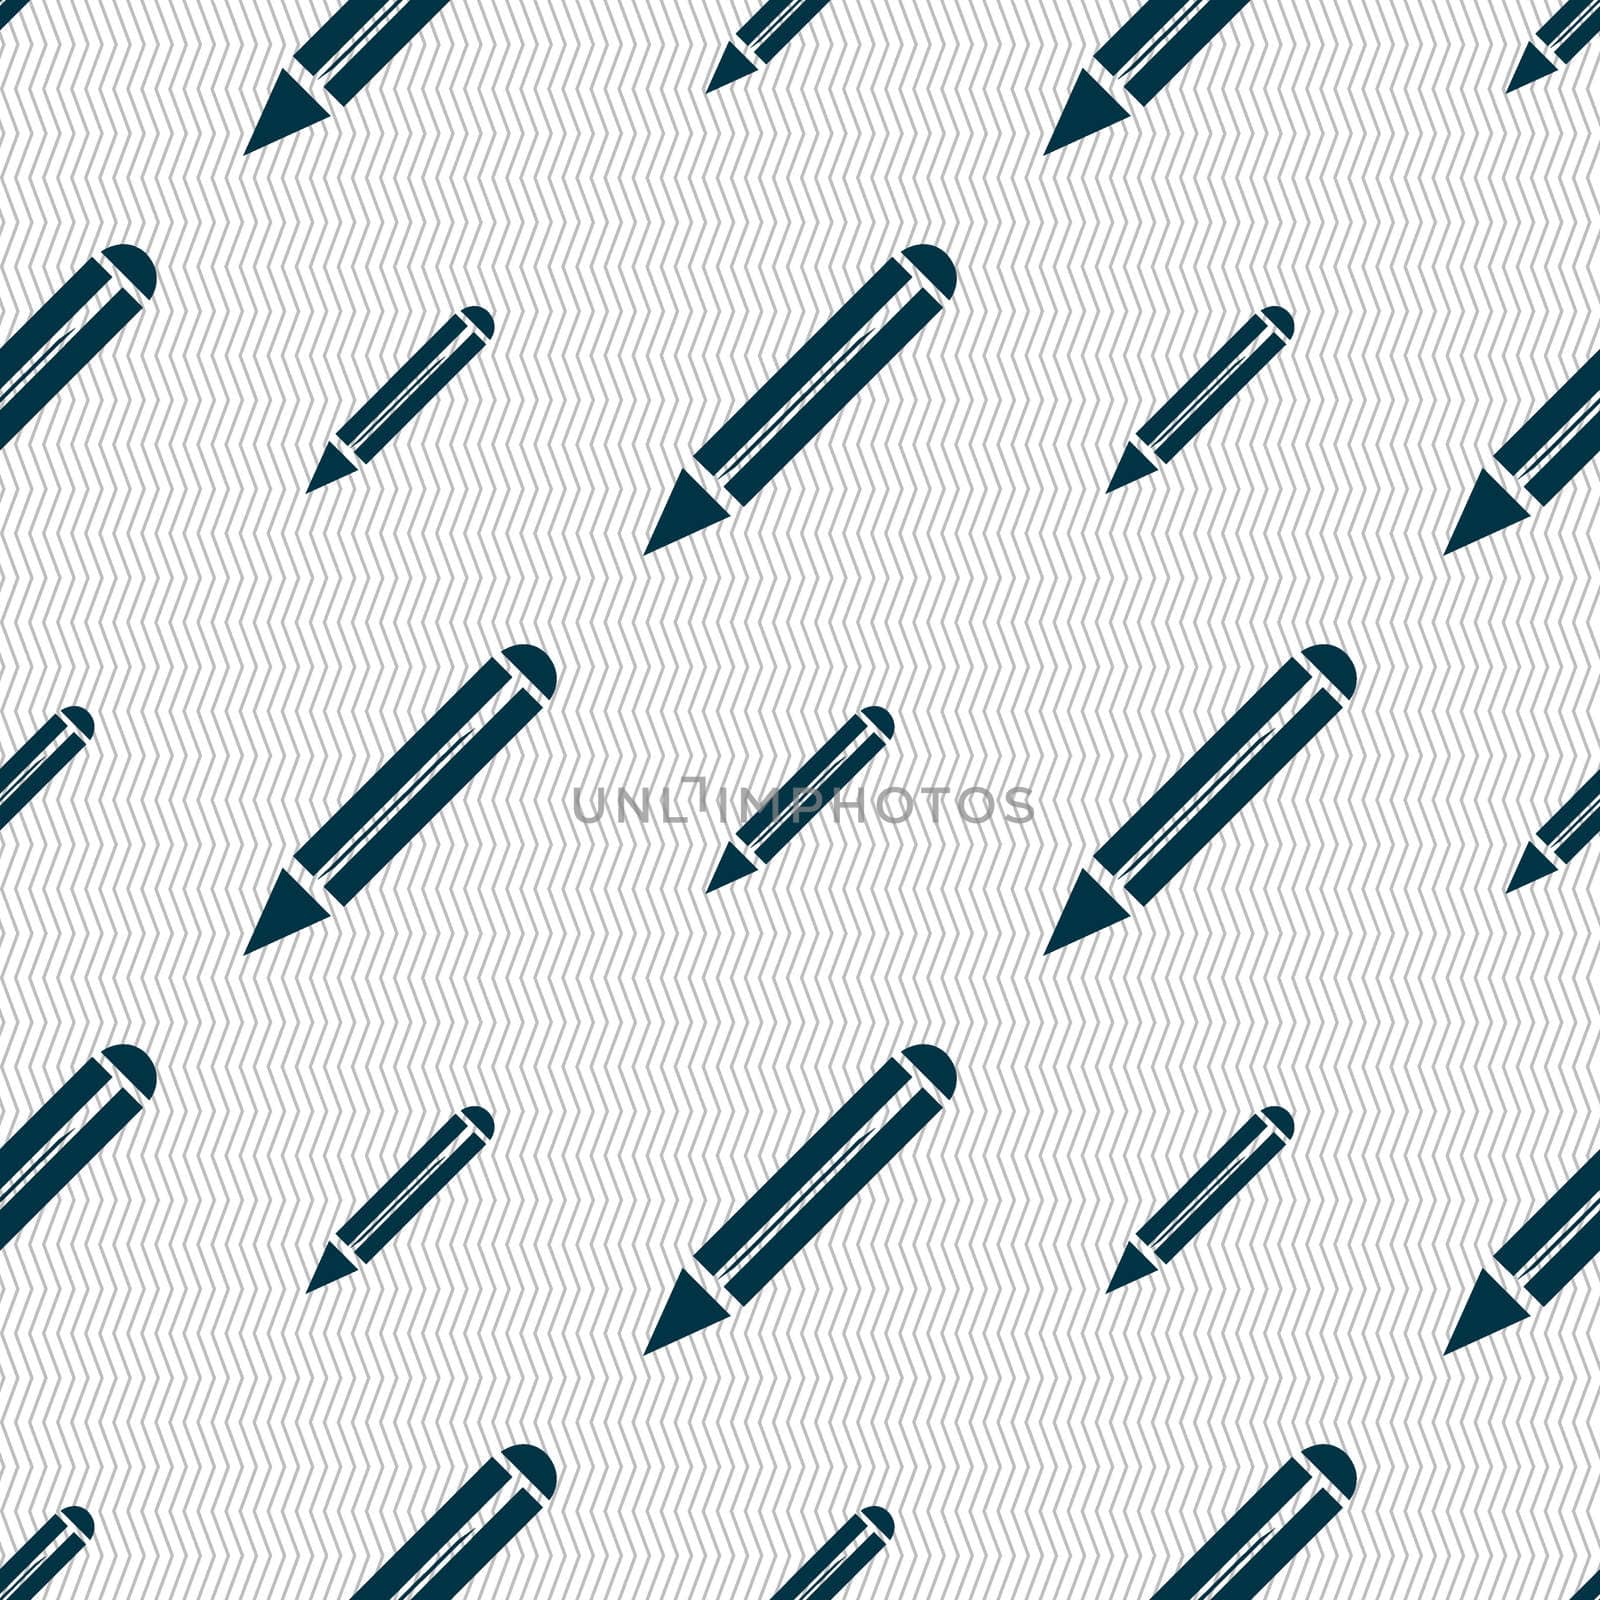 Pencil sign icon. Edit content button. Seamless abstract background with geometric shapes. illustration